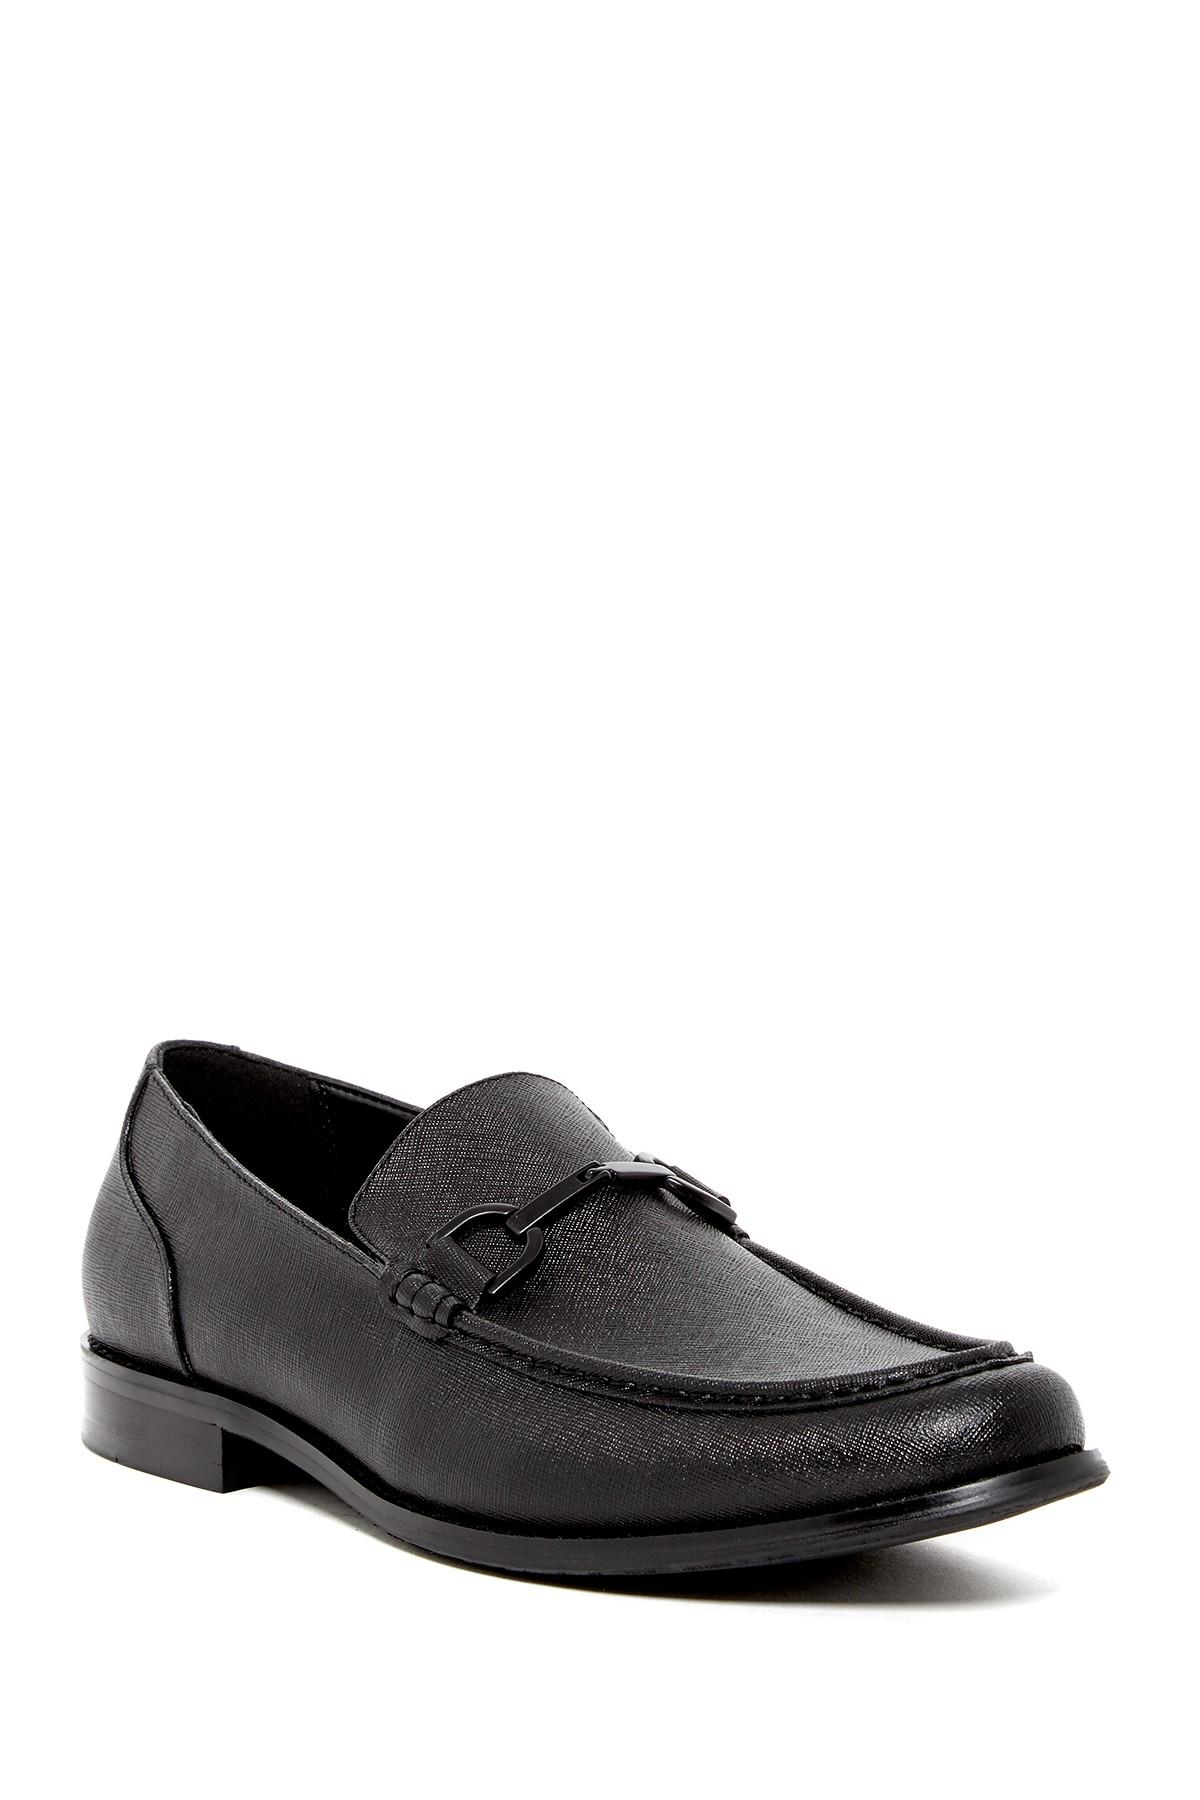 Lyst - Kenneth Cole Reaction Lead The Way Loafer (men) in Black for Men